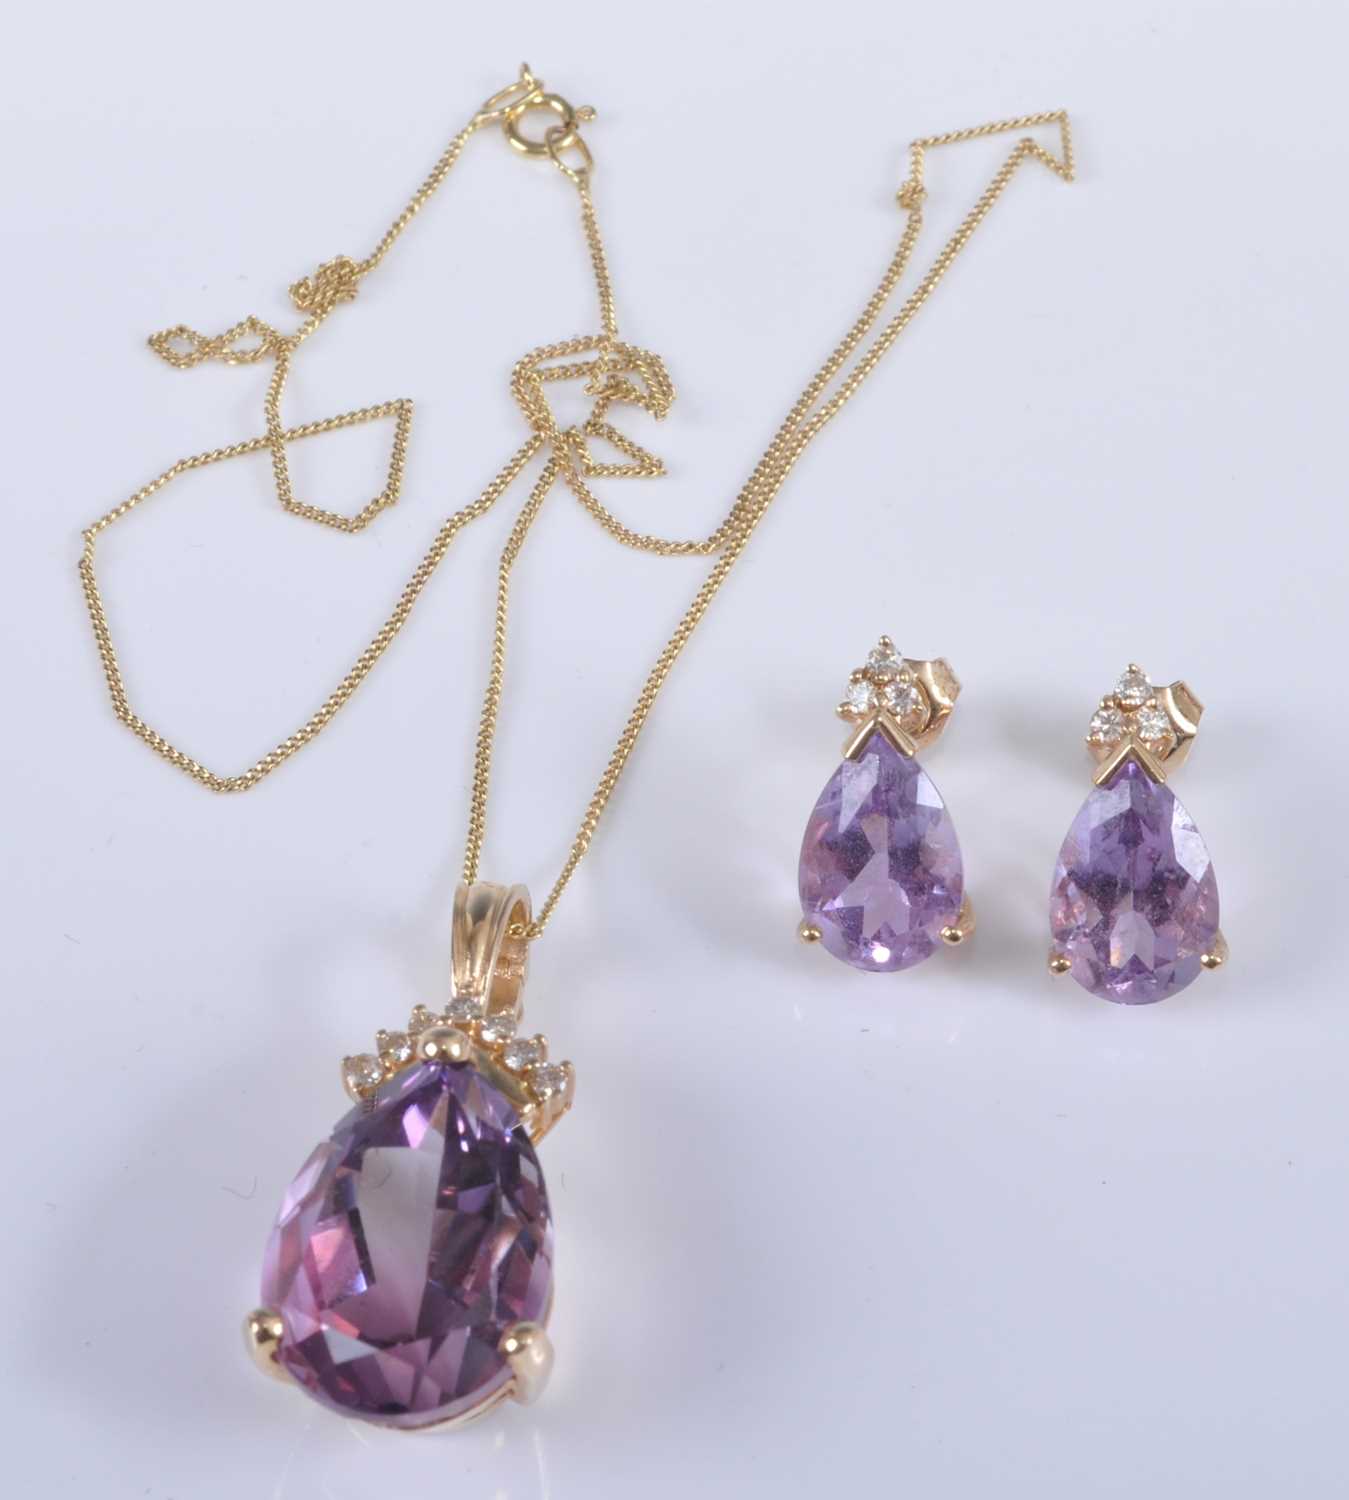 A 14ct yellow gold, amethyst and diamond pendant and earring set, the pendant featuring a pear cut - Image 2 of 2